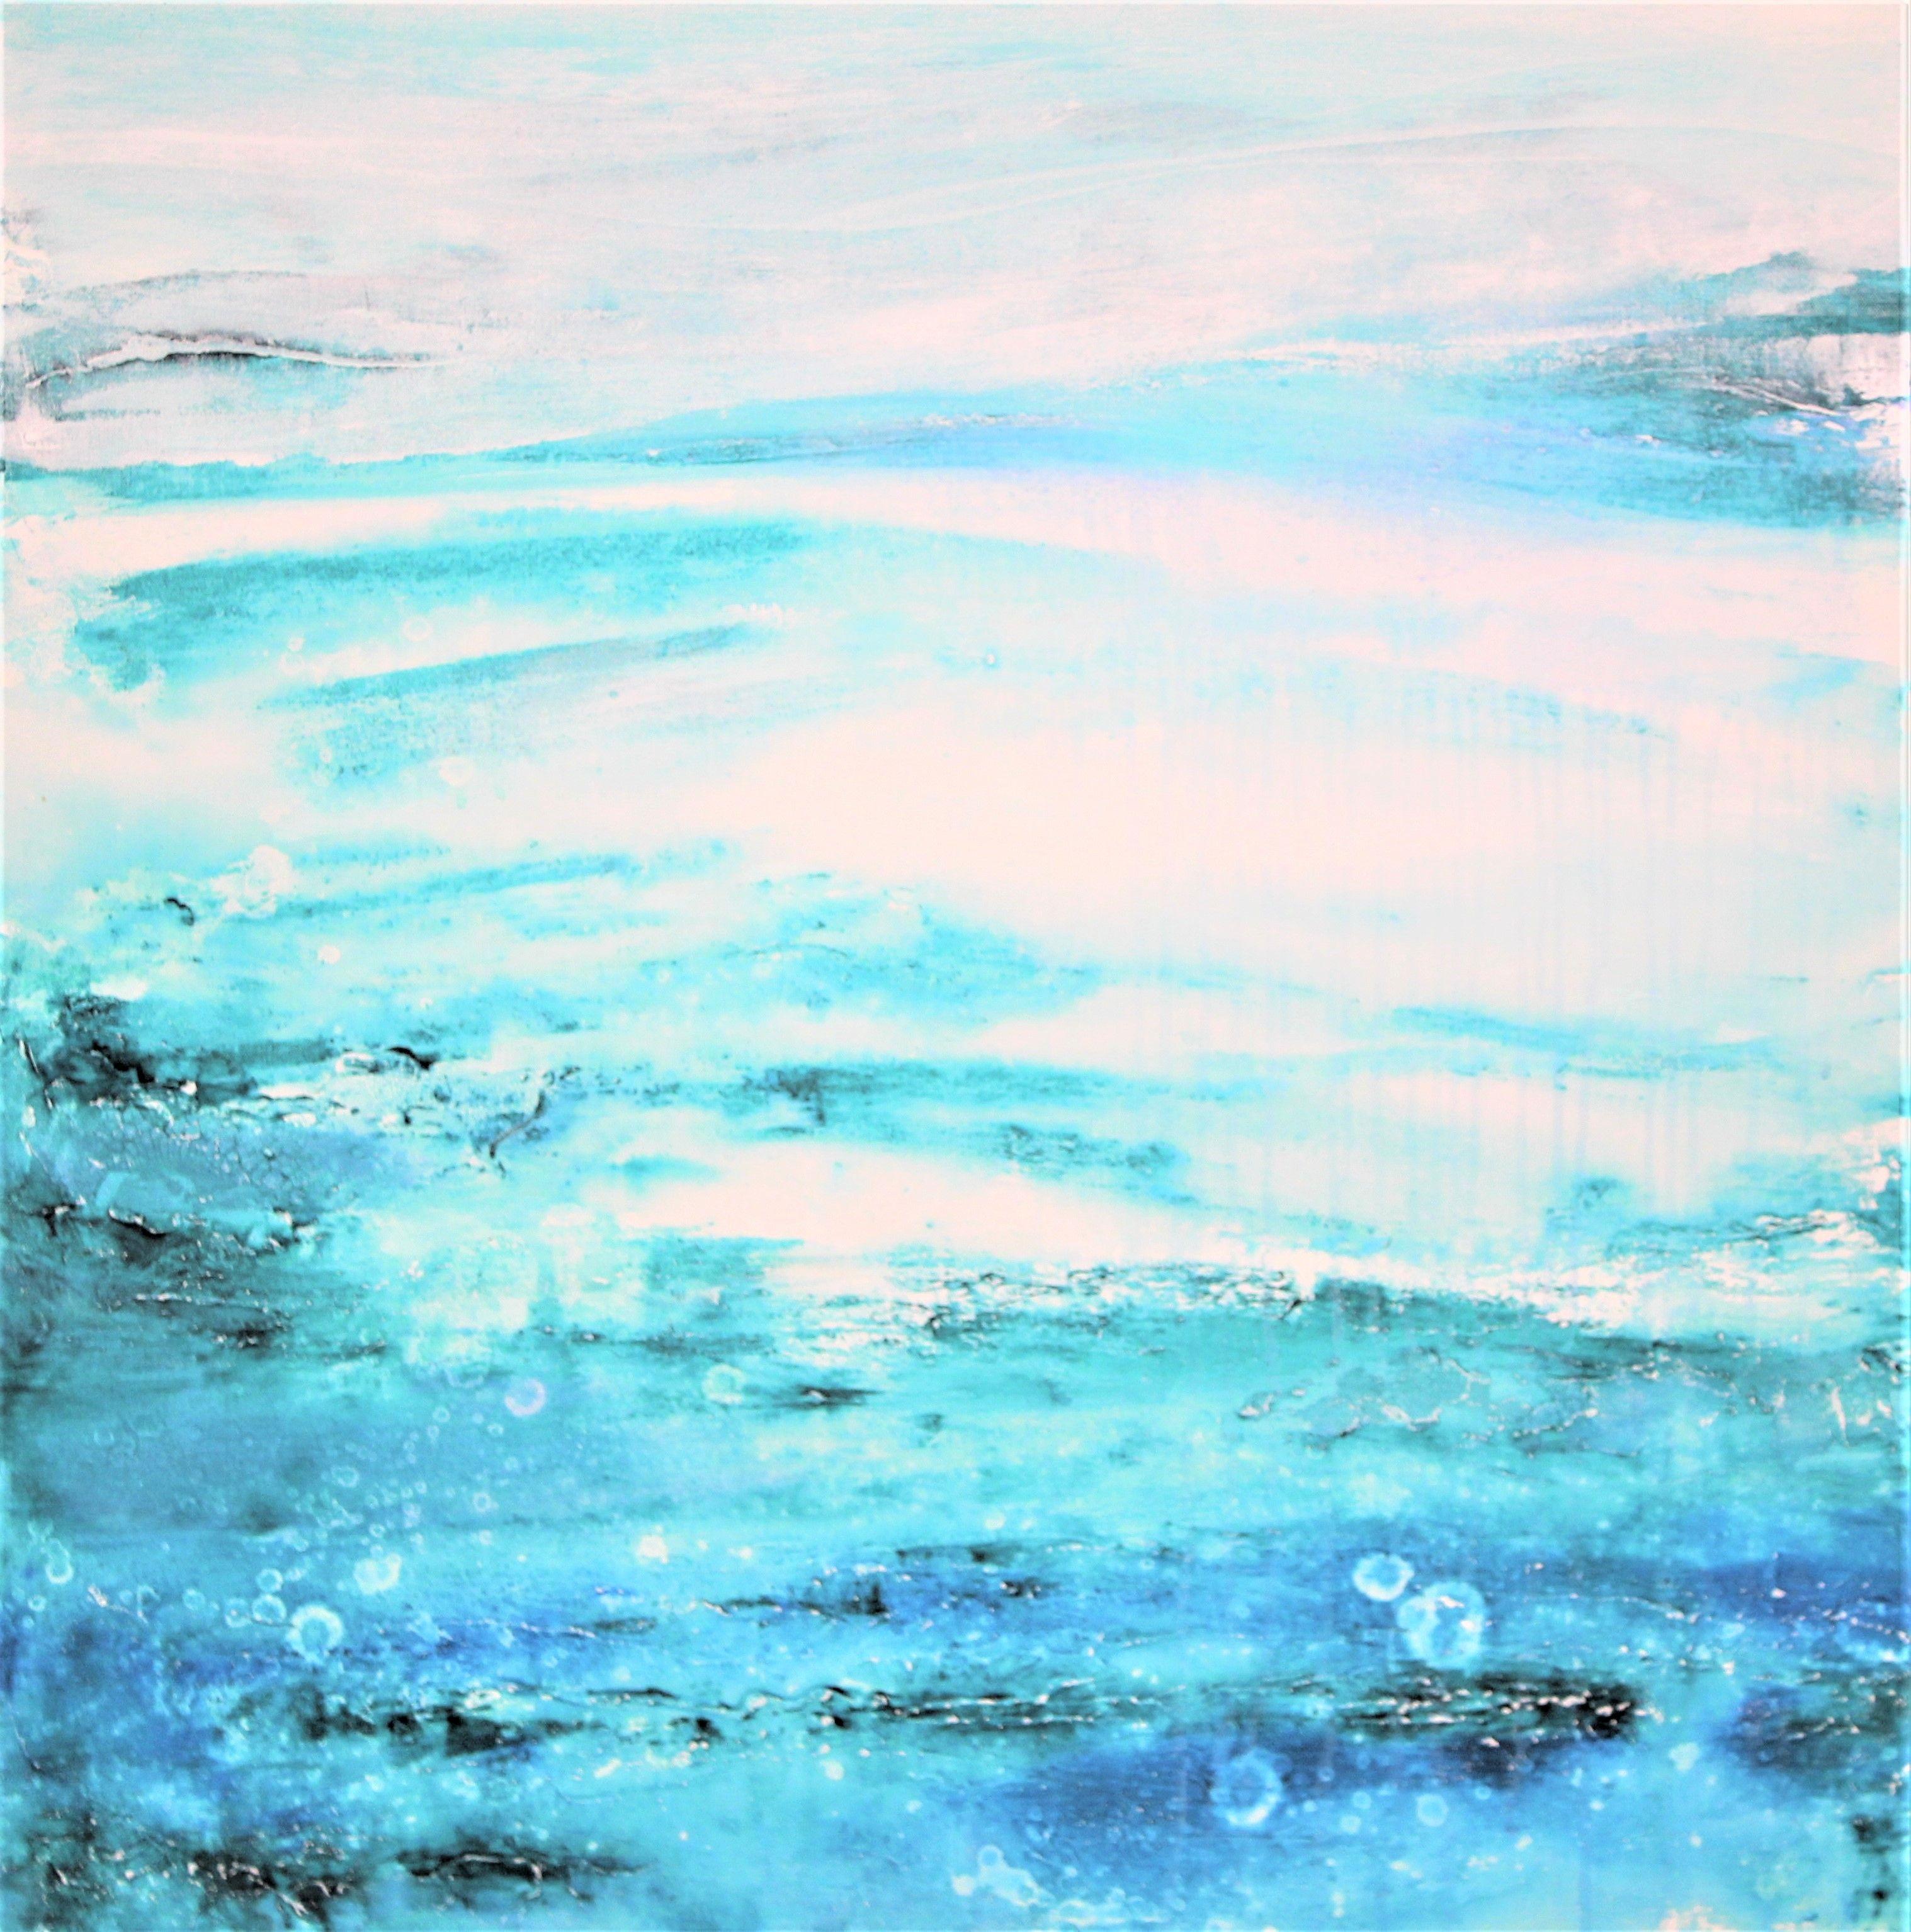 Laura Spring Abstract Painting - Breezy, Painting, Acrylic on Canvas